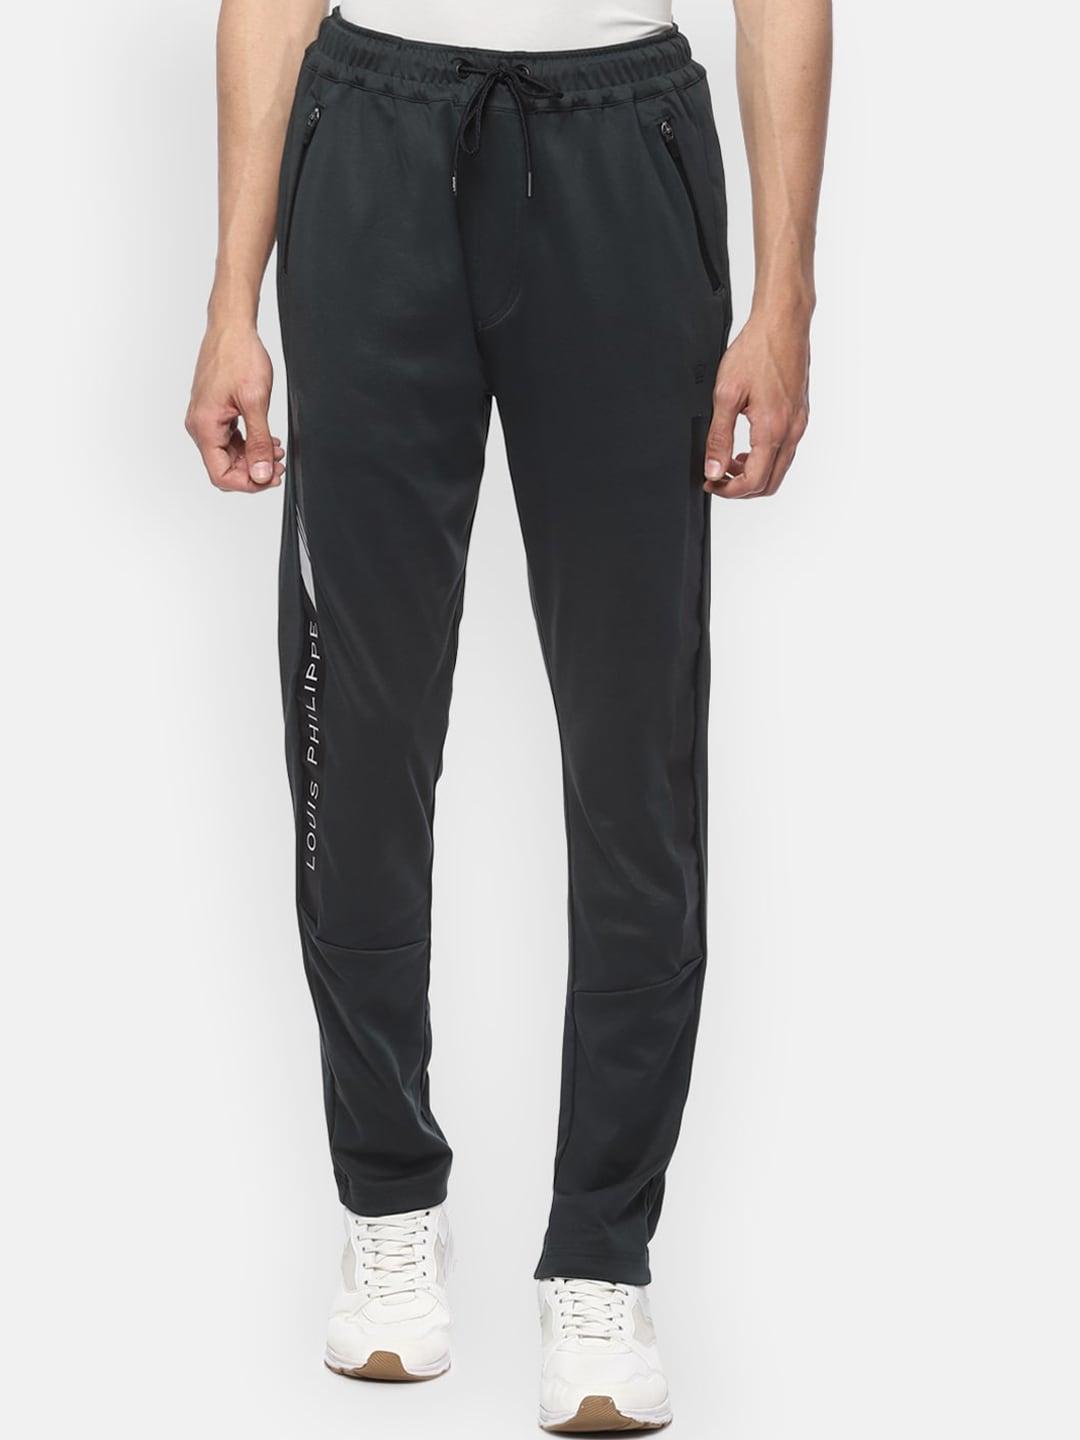 louis philippe athplay men charcoal grey solid slim-fit track pants